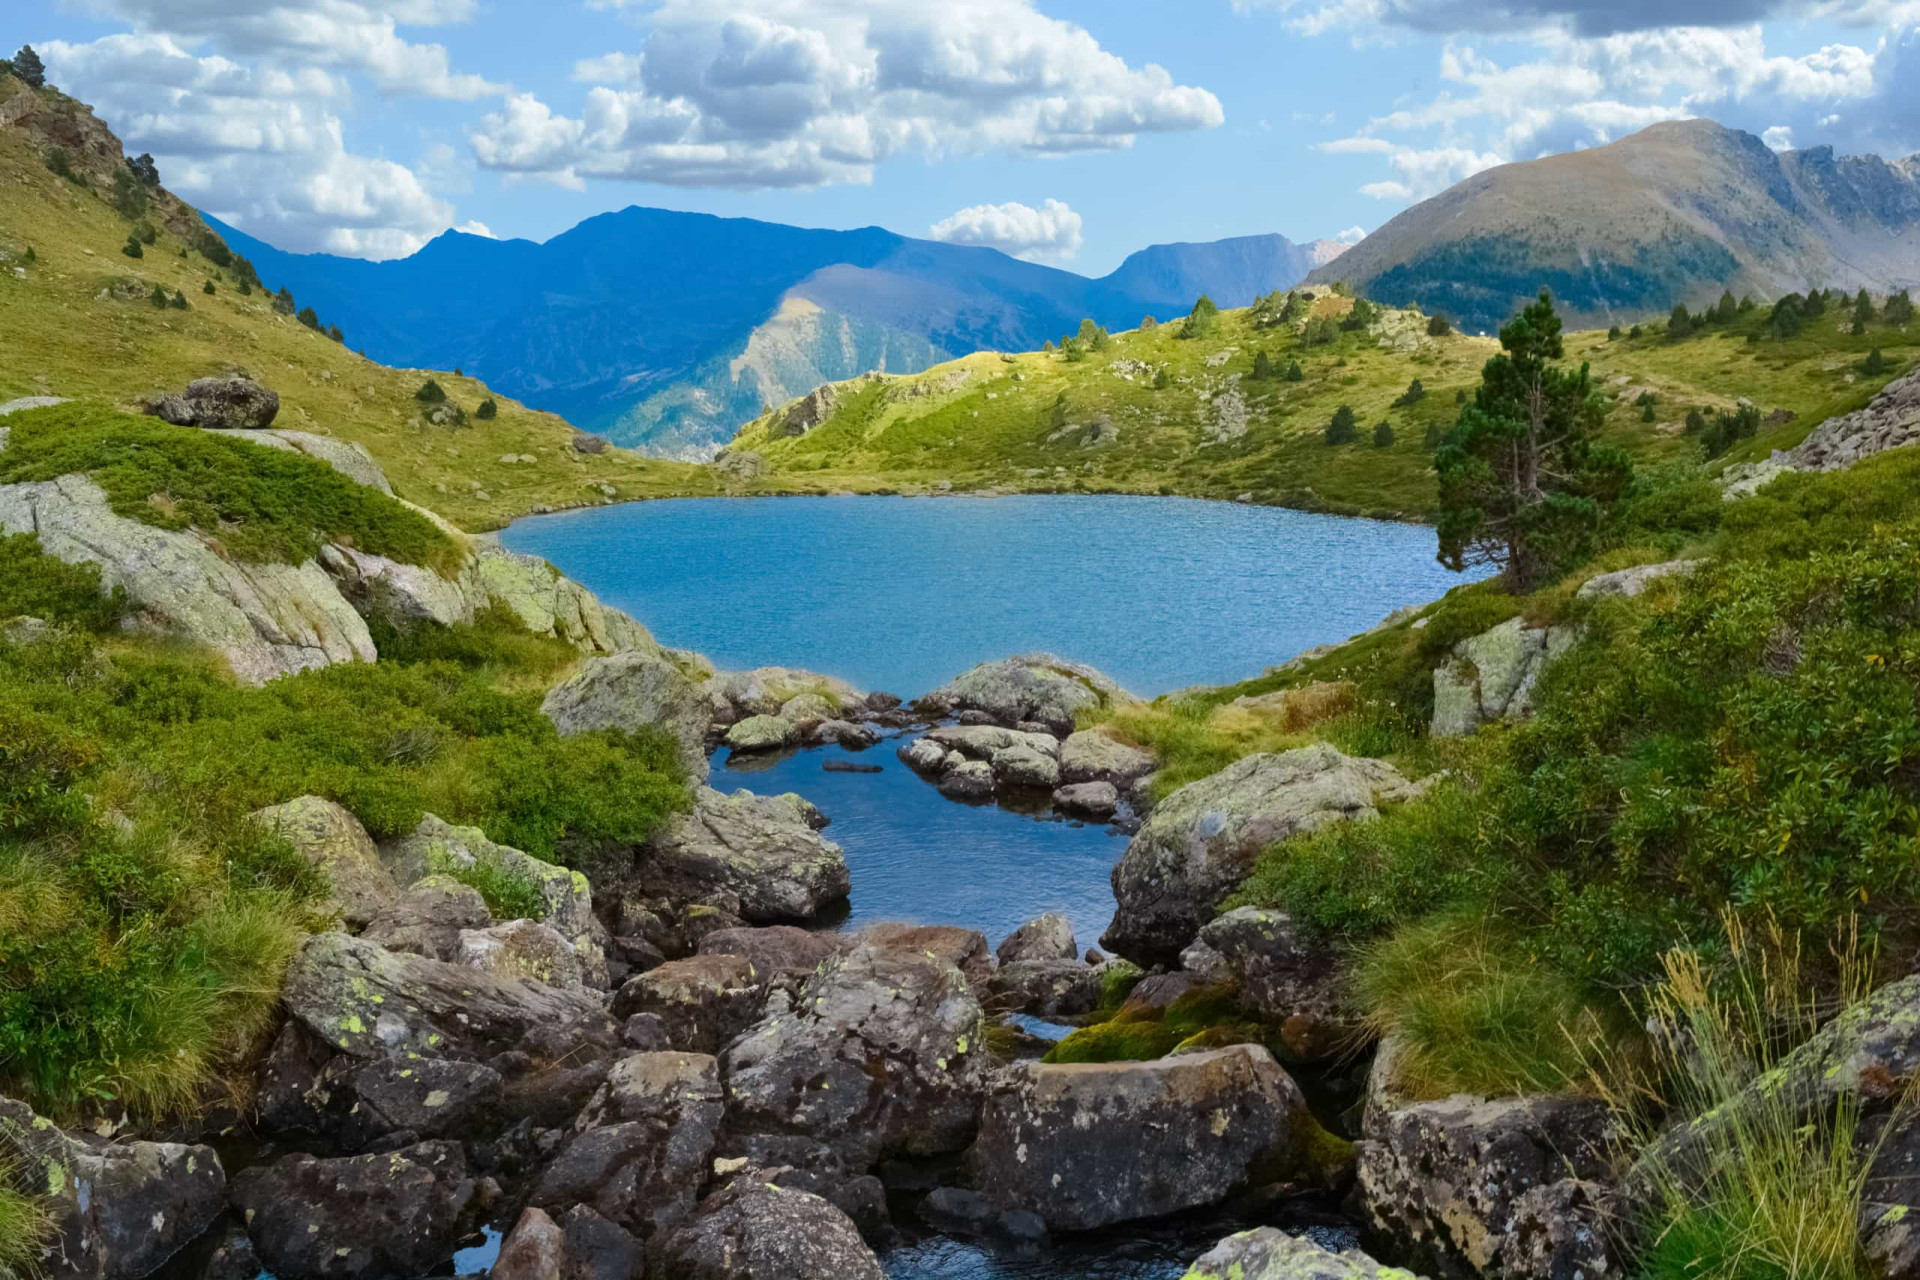 <p>One of the easiest and most rewarding hikes in Andorra is the Tristaina Lake Trail. Hikers who take this brisk 2.5-mile (4-km) trail will be greeted with breathtaking views of multiple pristine mountain lakes and scenes of the valleys below.</p> <p>Sources: (<a href="https://www.planetware.com/tourist-attractions/andorra-and.htm" rel="noopener">PlanetWare</a>) (<a href="https://visitandorra.com/en/culture/church-of-santa-coloma/" rel="noopener">Visit Andorra</a>) (<a href="https://33traveltips.com/things-to-do-in-andorra" rel="noopener">33 Travel Tips</a>)</p> <p>See also: <a href="https://www.starsinsider.com/travel/497171/take-a-closer-look-at-liechtenstein">Take a closer look at Liechtenstein</a></p><p><a href="https://www.msn.com/en-za/community/channel/vid-7xx8mnucu55yw63we9va2gwr7uihbxwc68fxqp25x6tg4ftibpra?cvid=94631541bc0f4f89bfd59158d696ad7e">Follow us and access great exclusive content every day</a></p>